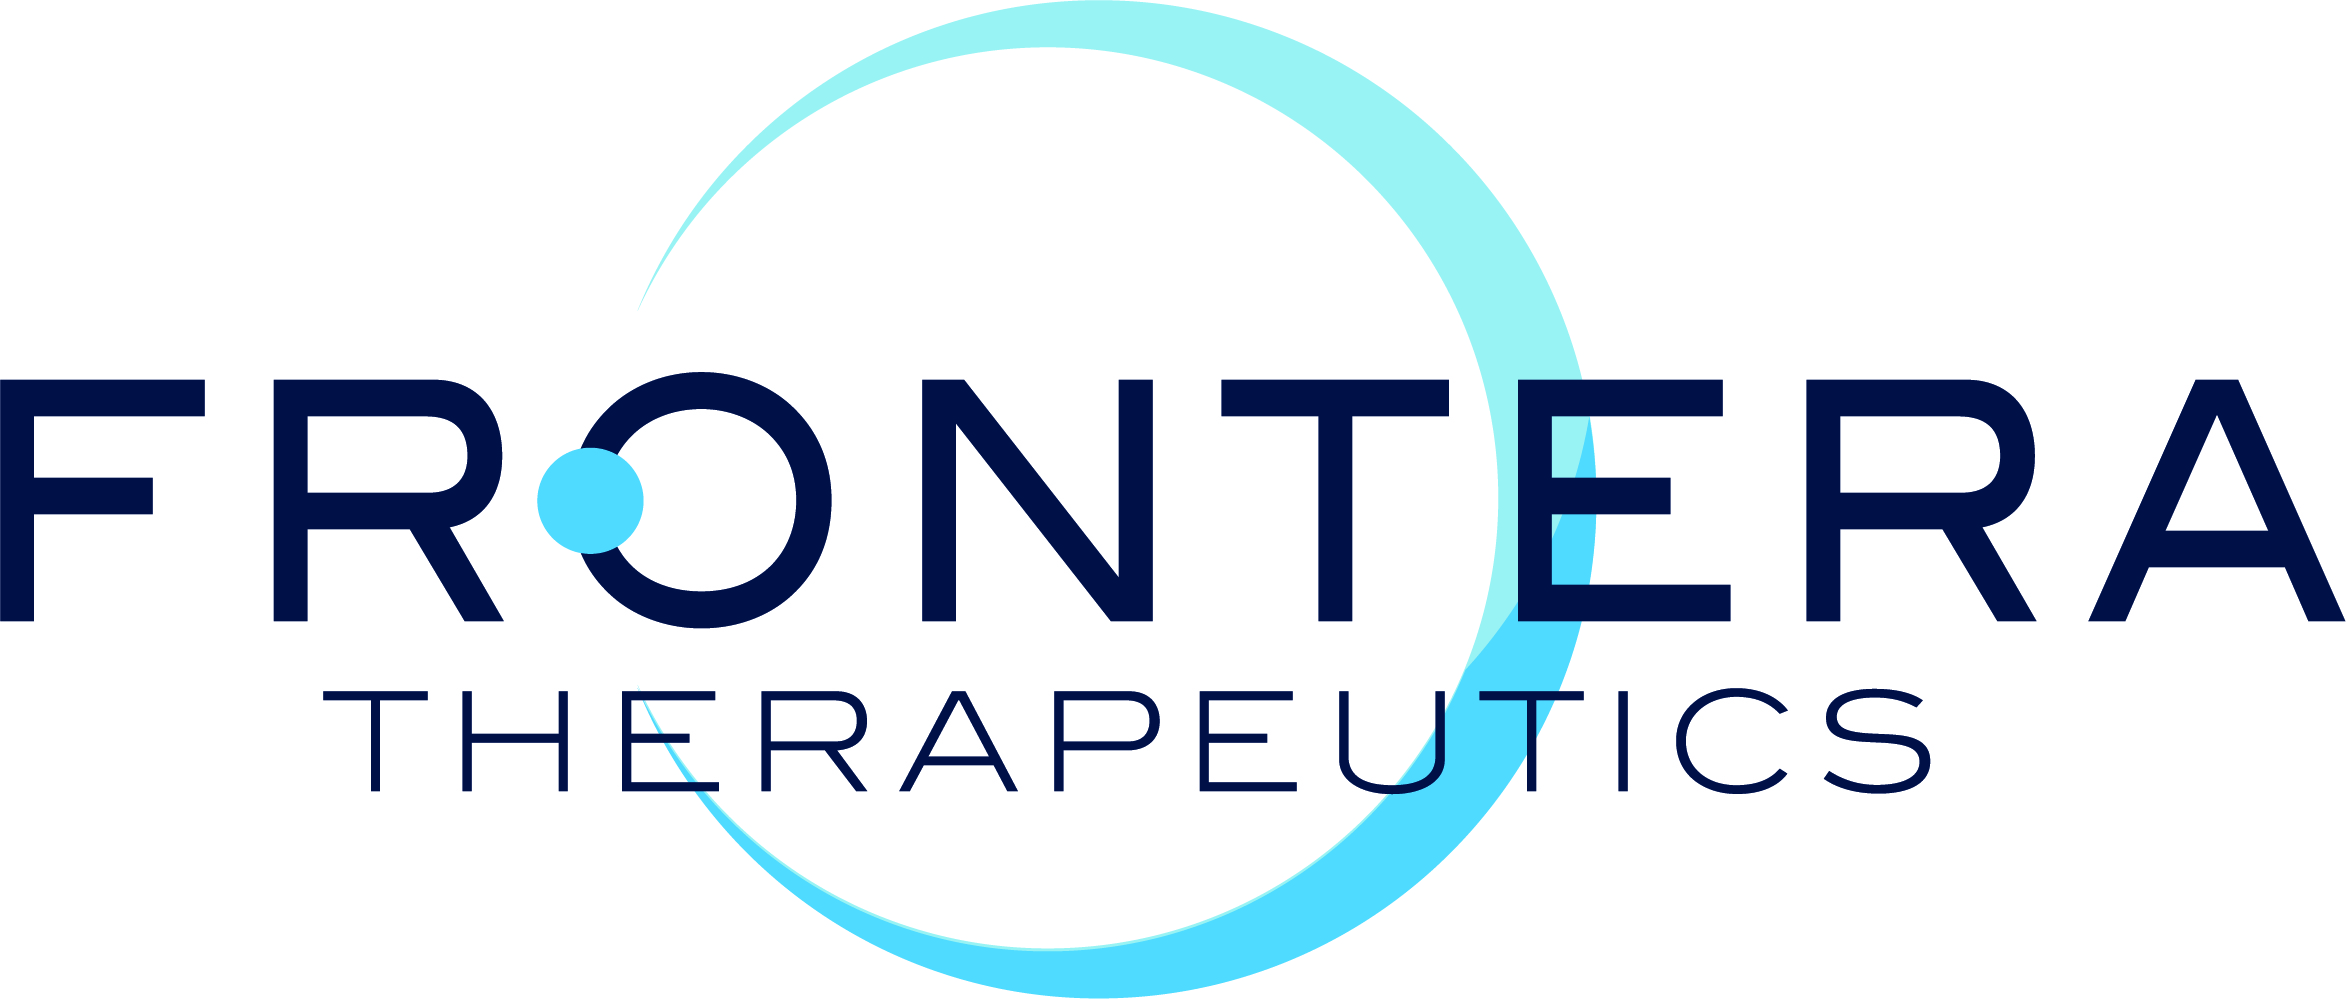 Frontera Therapeutics Doses First Patient in a Clinical Trial of FT-003 Gene Therapy for the Treatment of Wet AMD